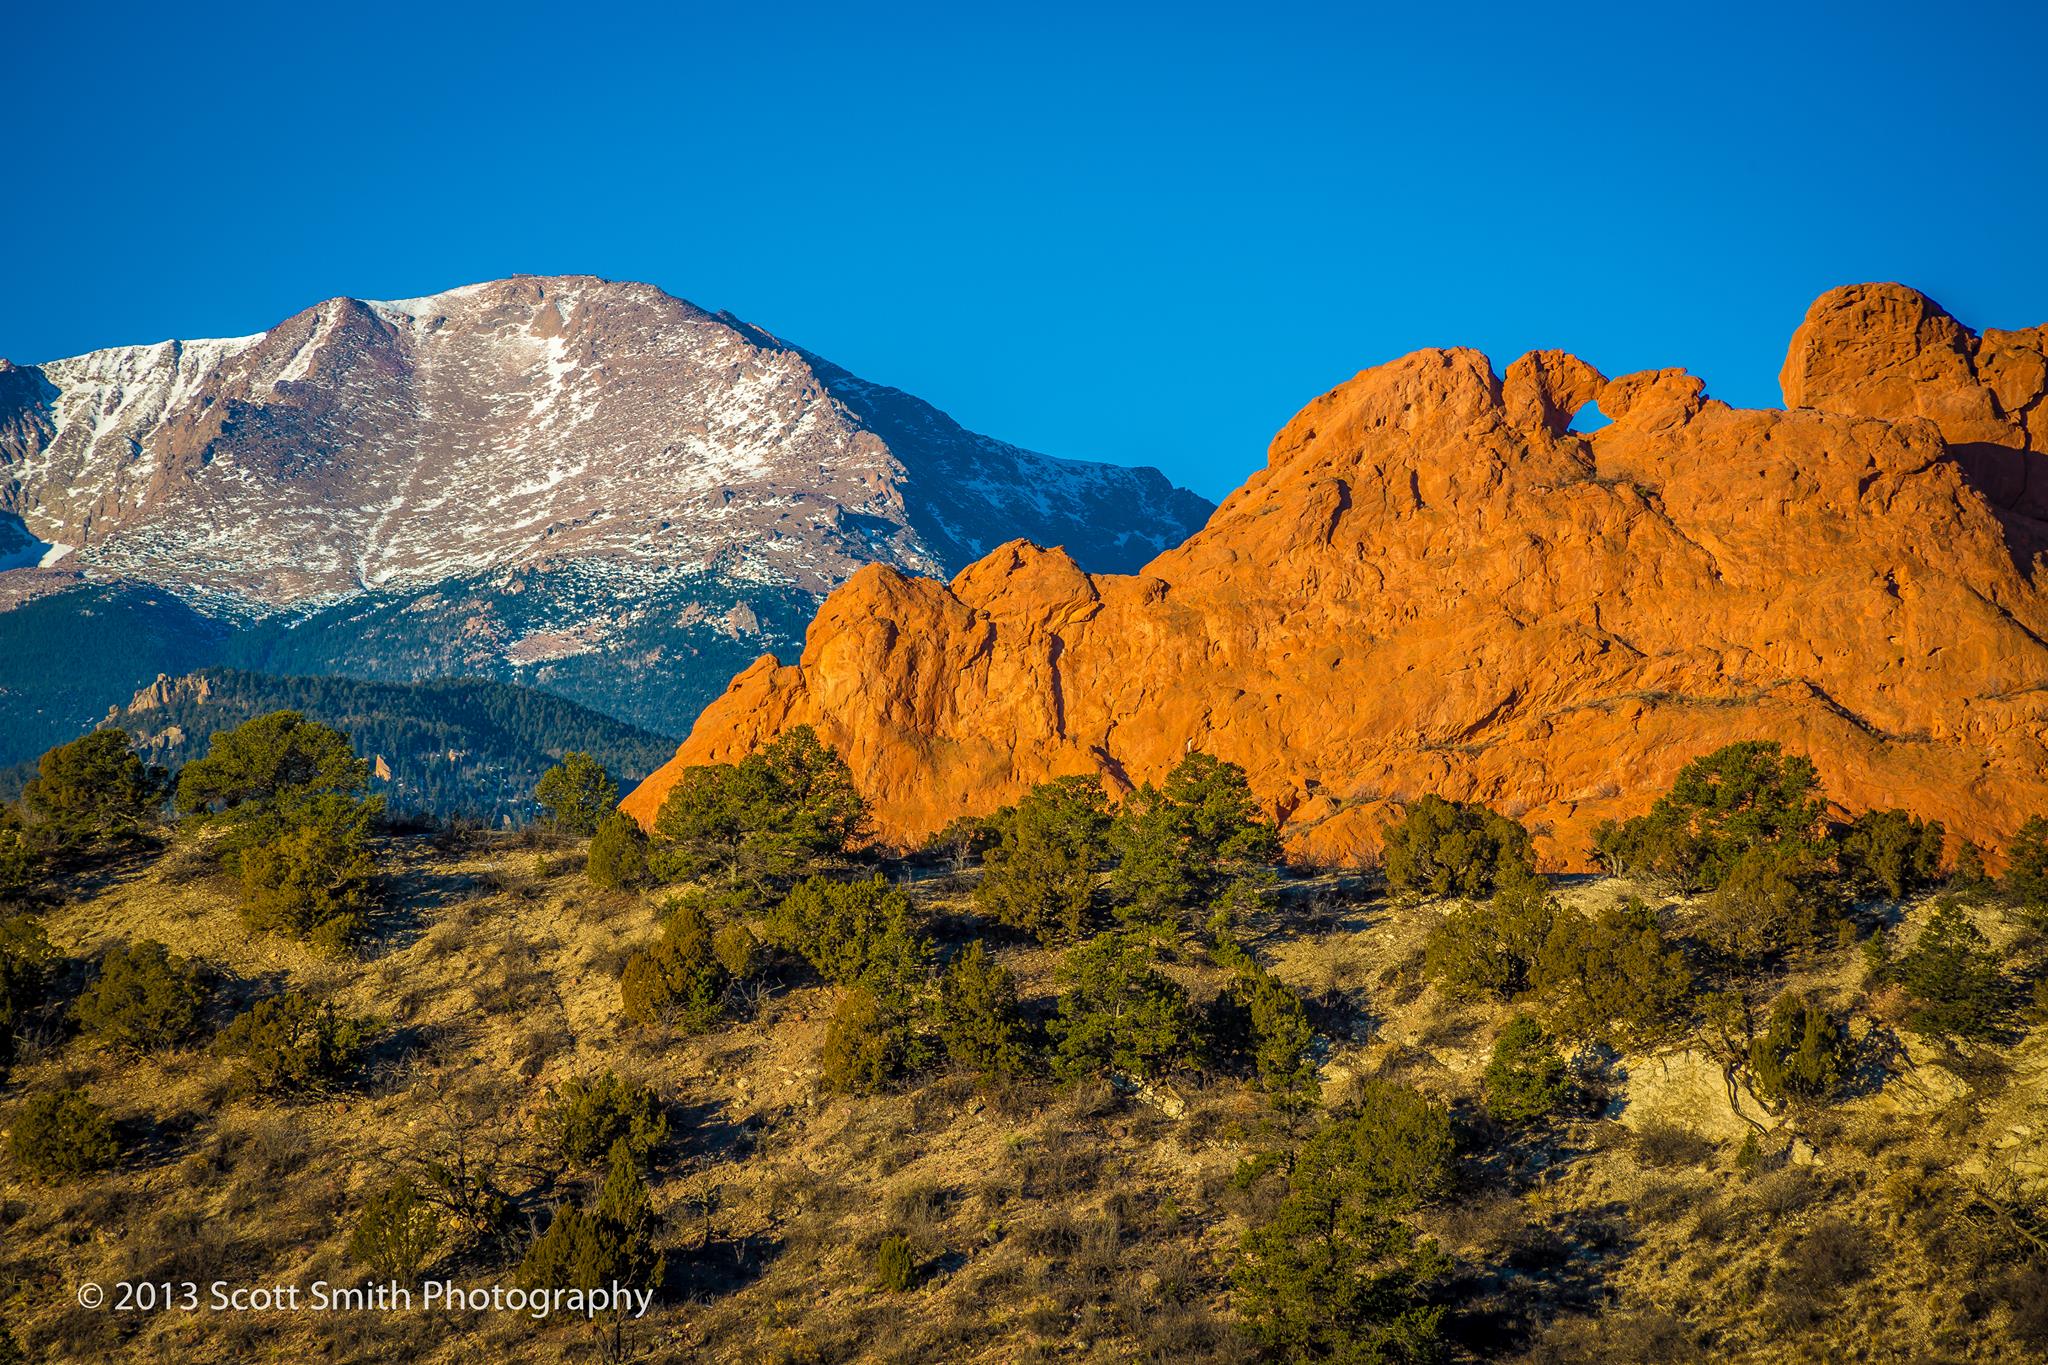 Sun rising on the Garden of the Gods - The Garden of the Gods earlier in the morning with Pike's Peak in the background. by Scott Smith Photos